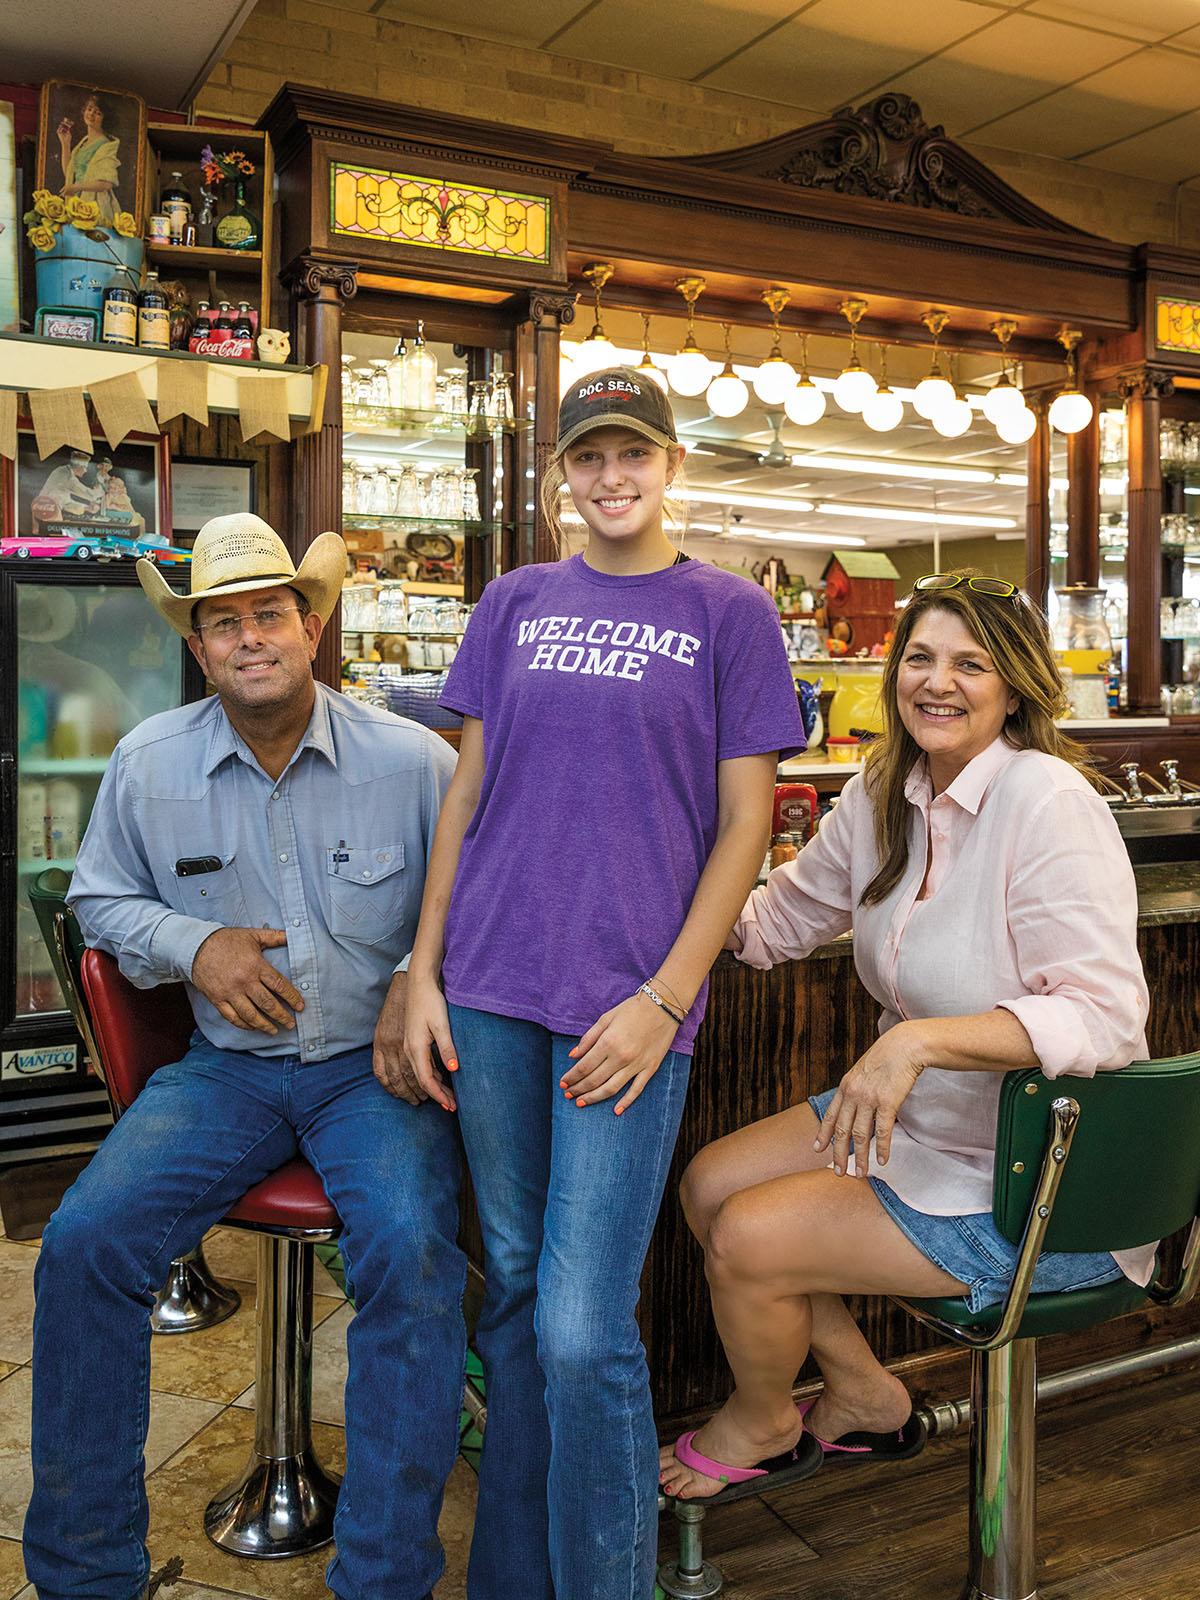 Three people lean on barstools in front of an old fashioned soda fountain